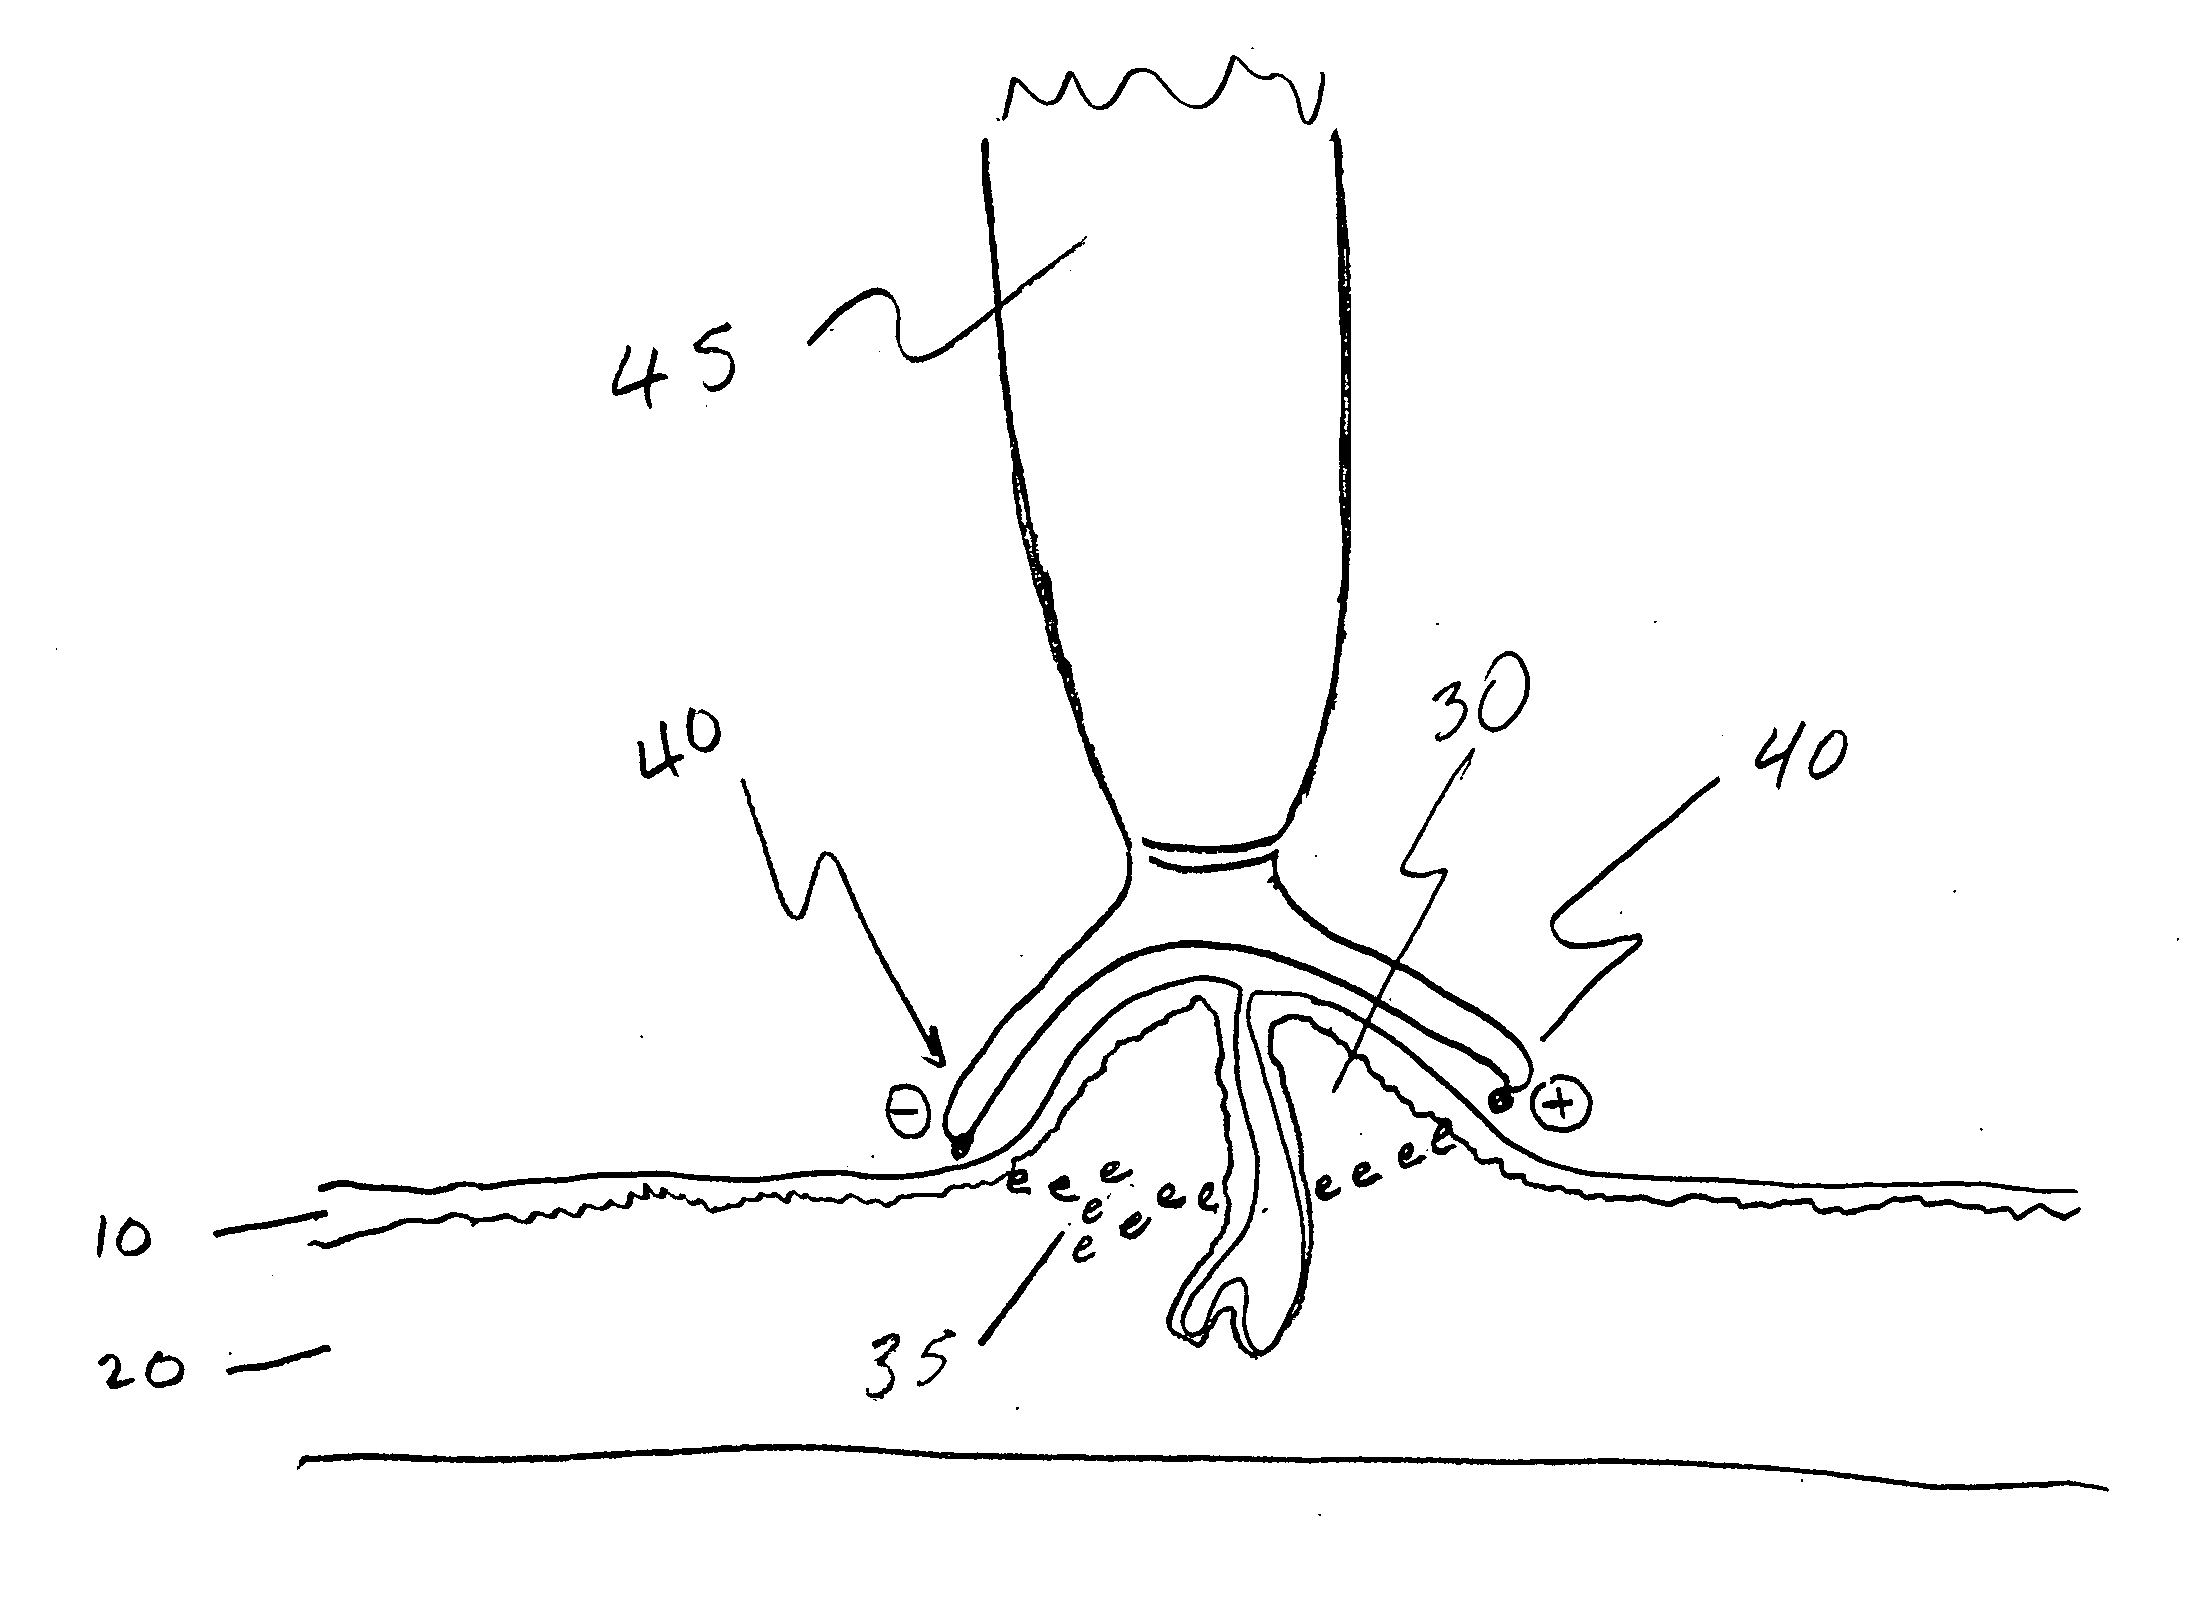 Acne and skin defect treatment via non-radiofrequency electrical current controlled power delivery device and methods